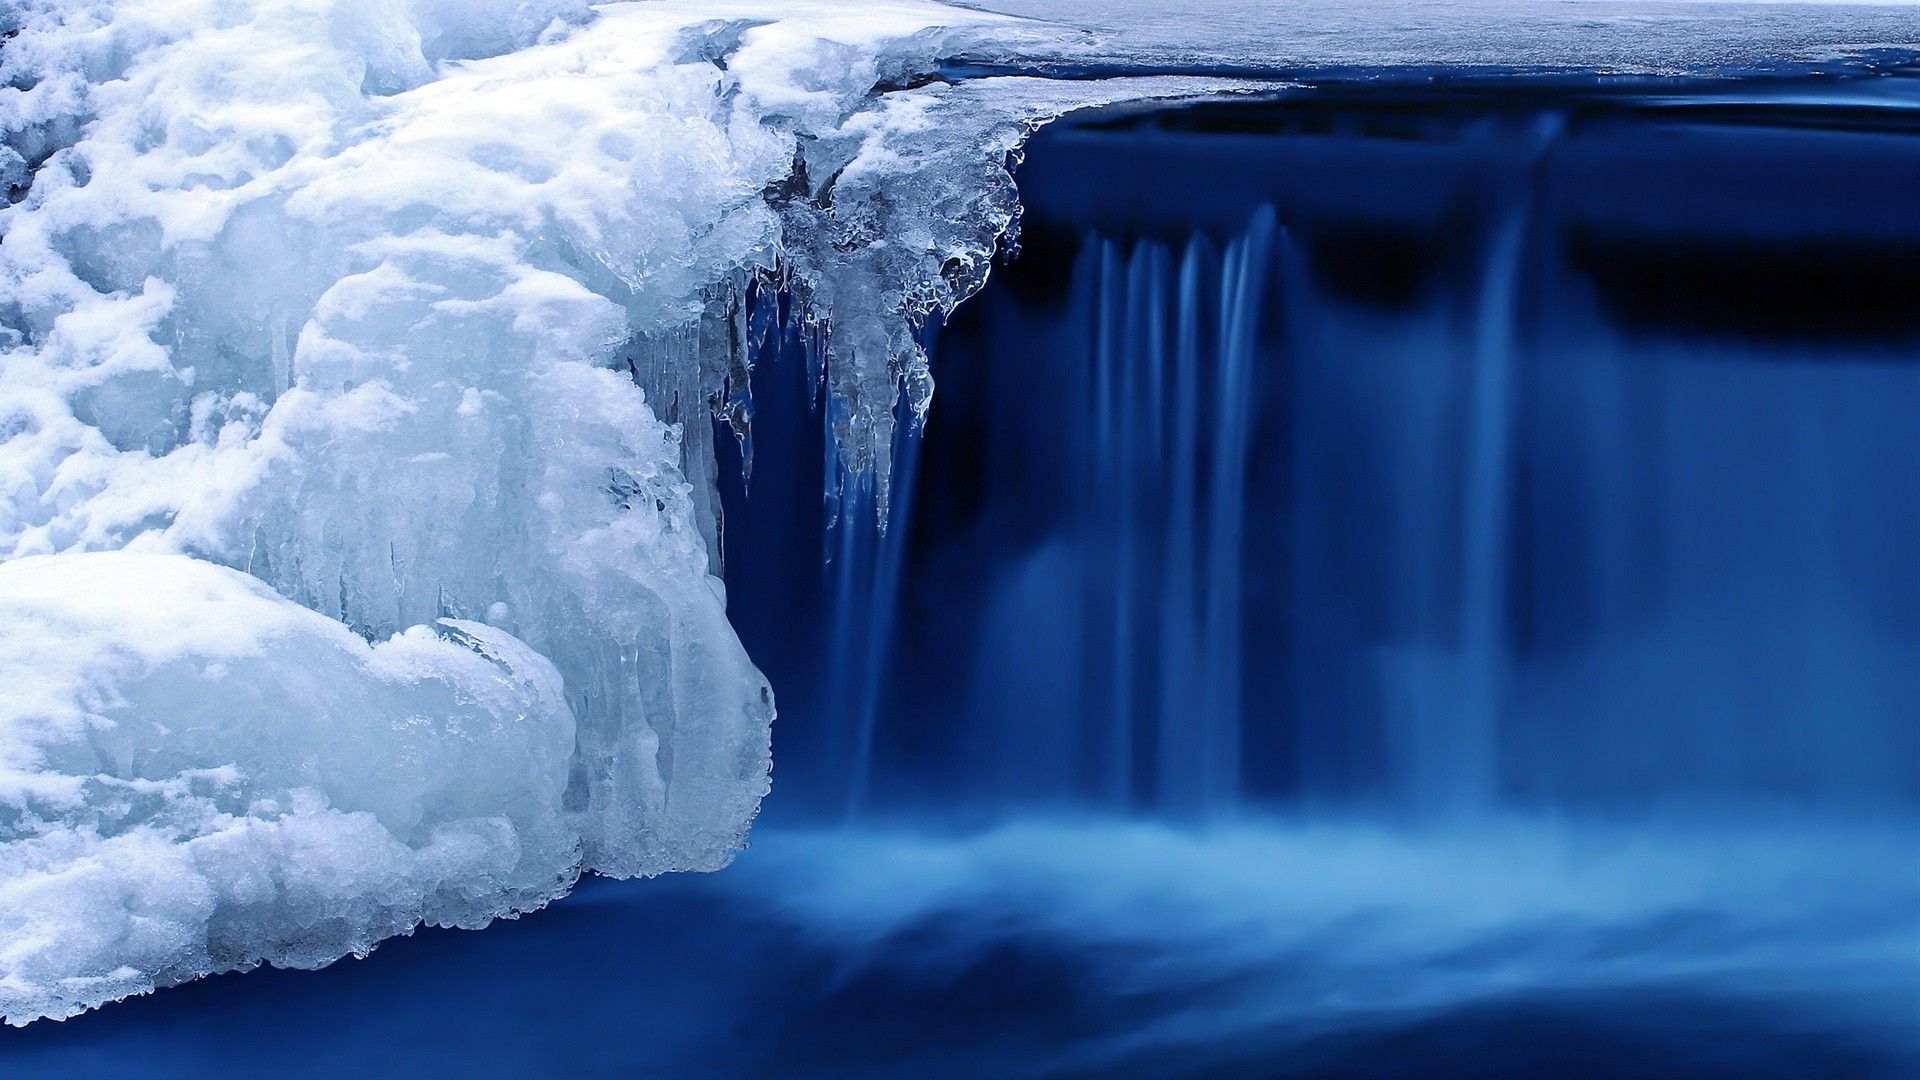 Very cold, Winter, blue river covered with ice wallpaper (phone background)